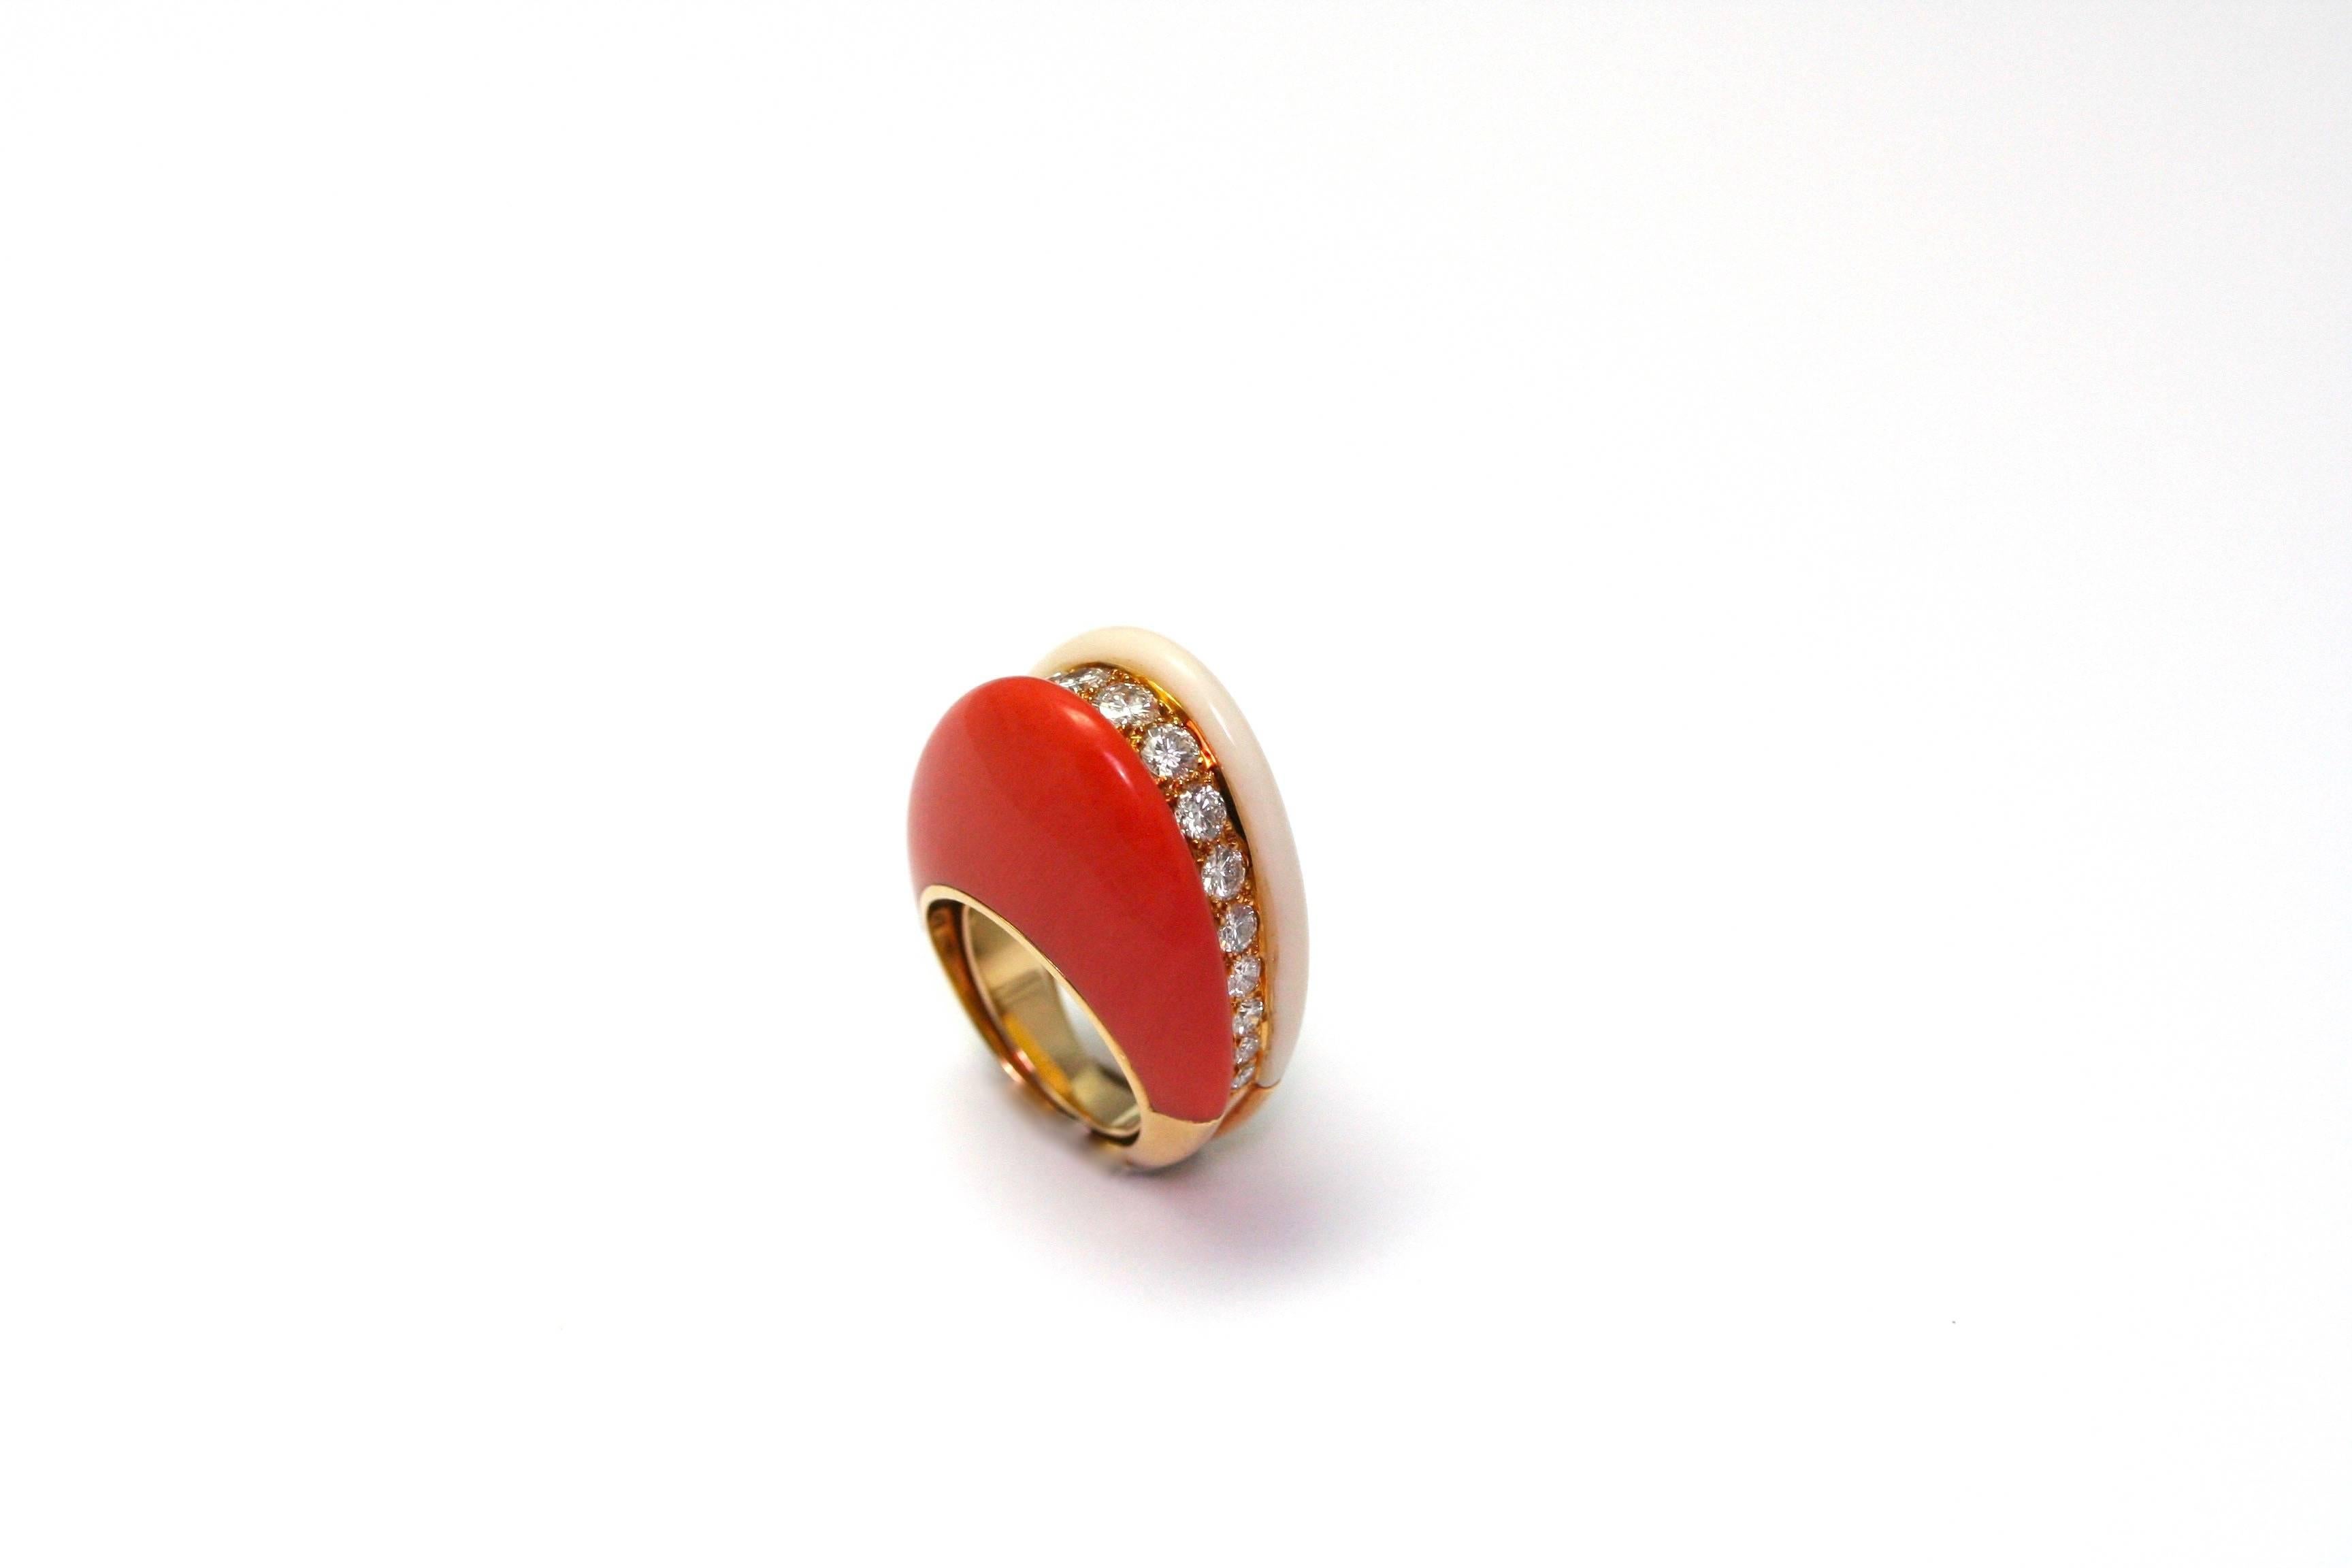 Van Cleef & Arpels half set composed with a ring and earrings in yellow gold, diamonds, white and red coral. Signed and numbered. 
(40,6 grs)
Dimensions : 
Ring : total height : 3cm, ring size 3 3/4 (large 46)
Earrings : height : 2.4 cm, lenght :